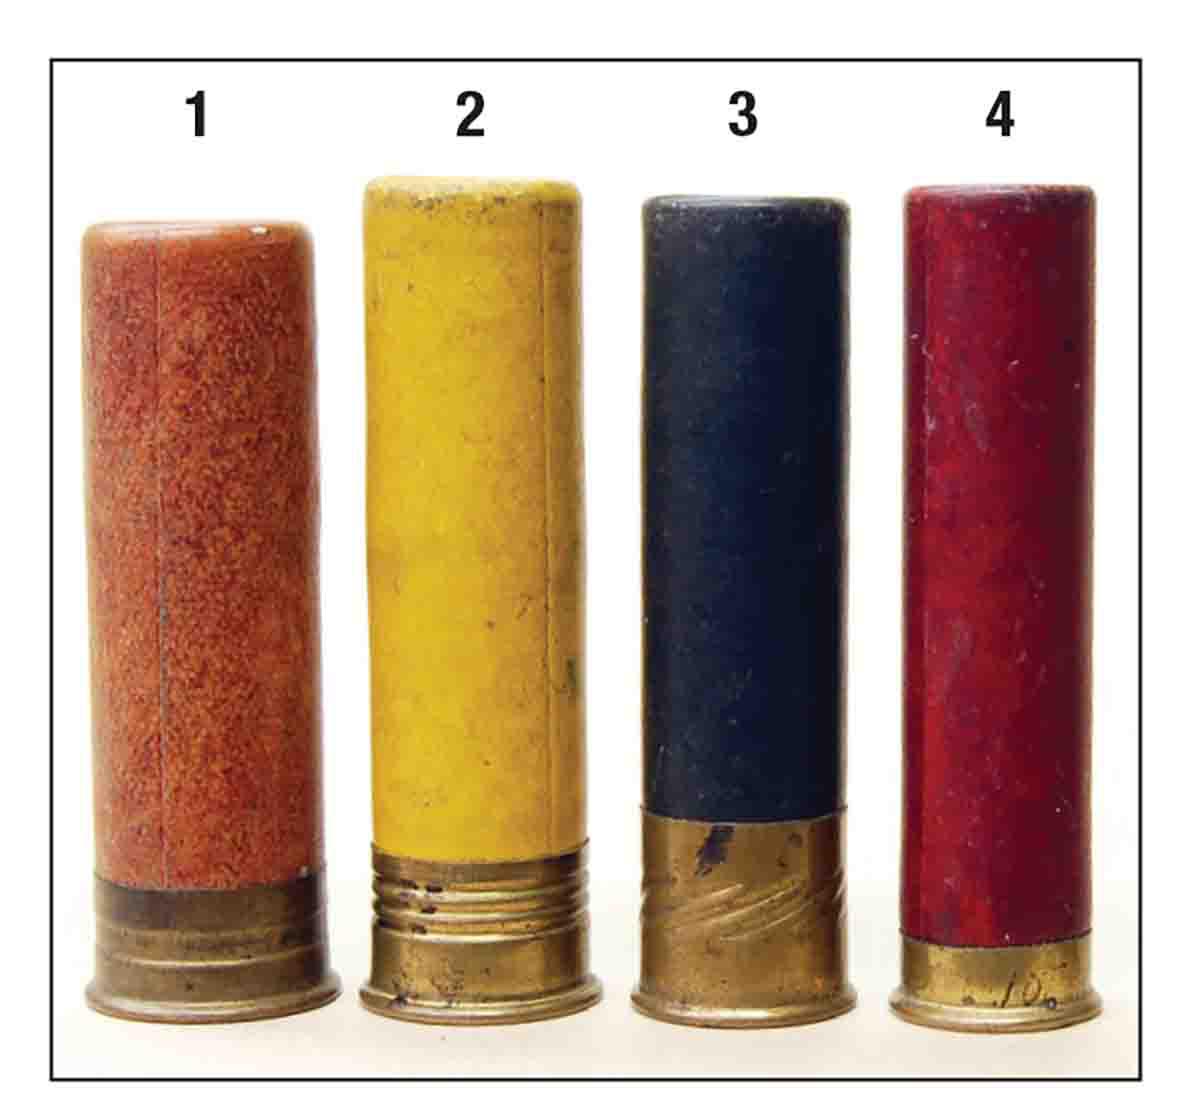 Superior smallbore shotgun shells of the early years of the .410 include the (1) 20, (2) 24, (3) 28 and the (4) 32 gauges.